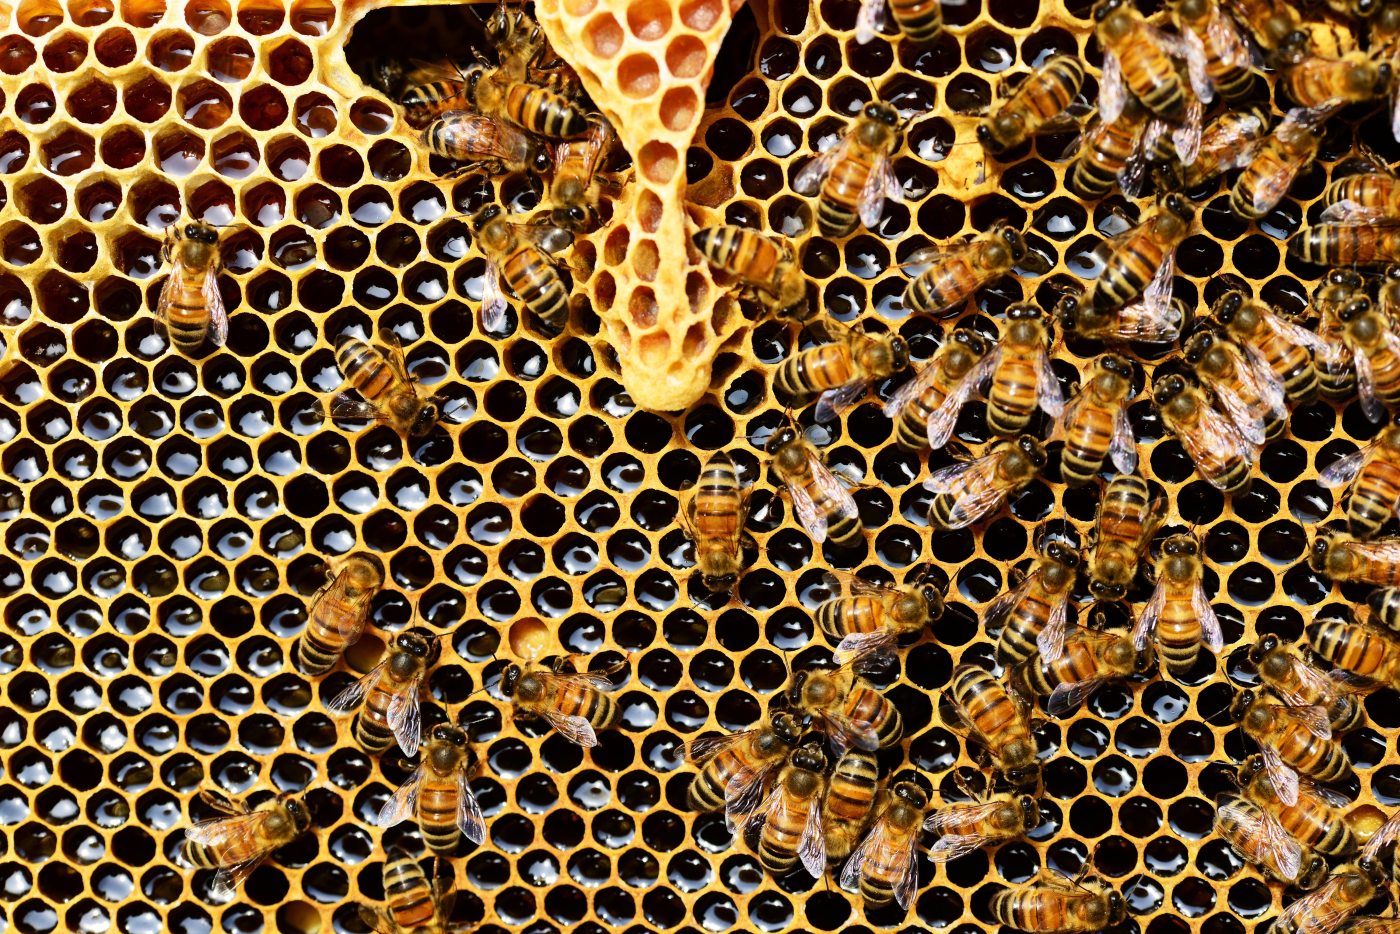 Photo of Worker bees in their wax honeycomb collecting the nectar from the beeswax.